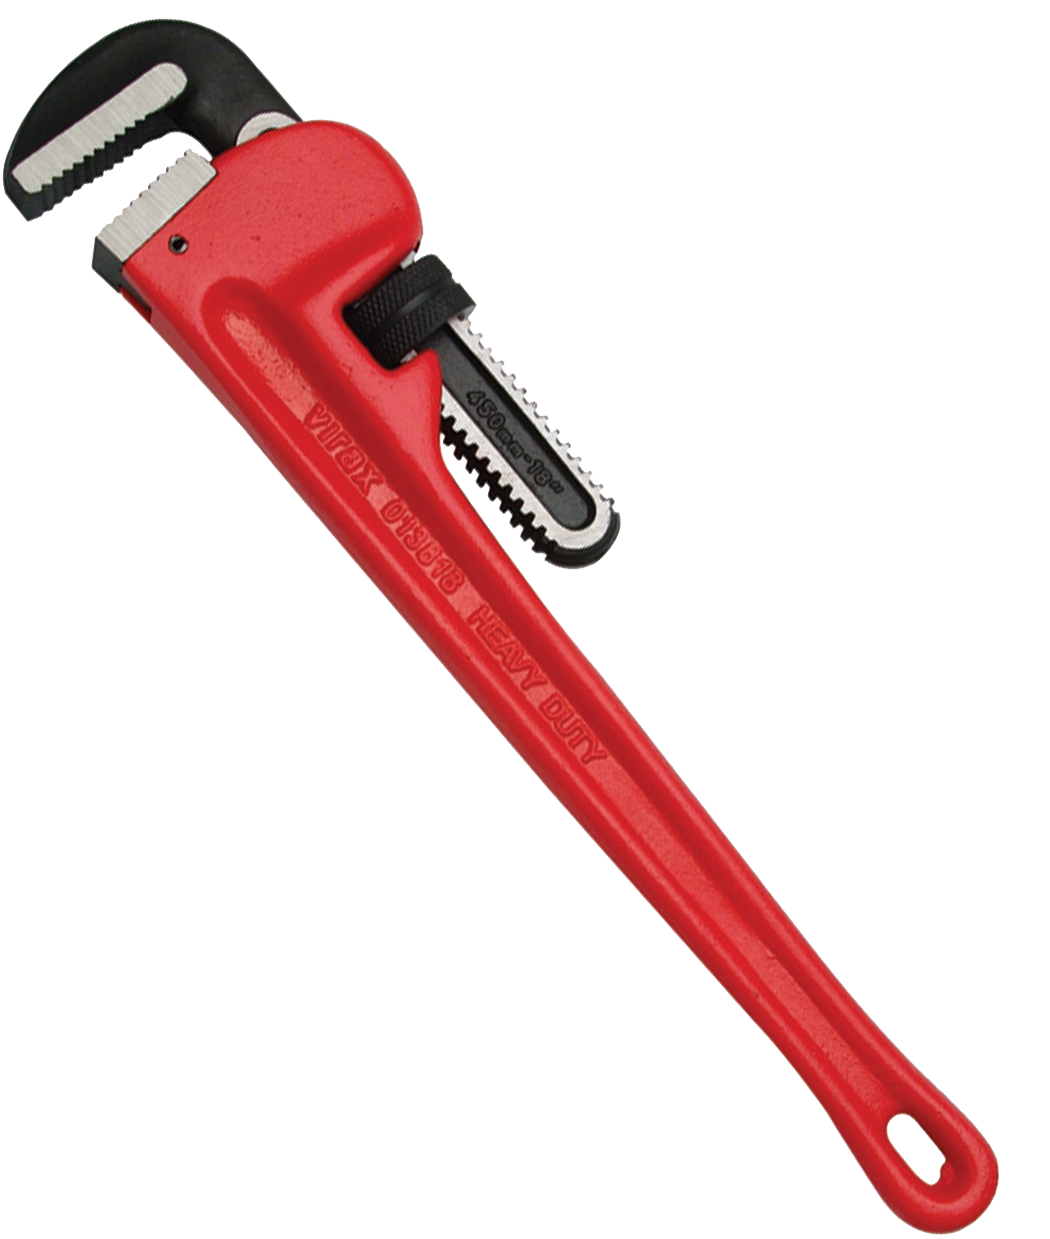 Engine clipart wrench. Png transparent images pluspng